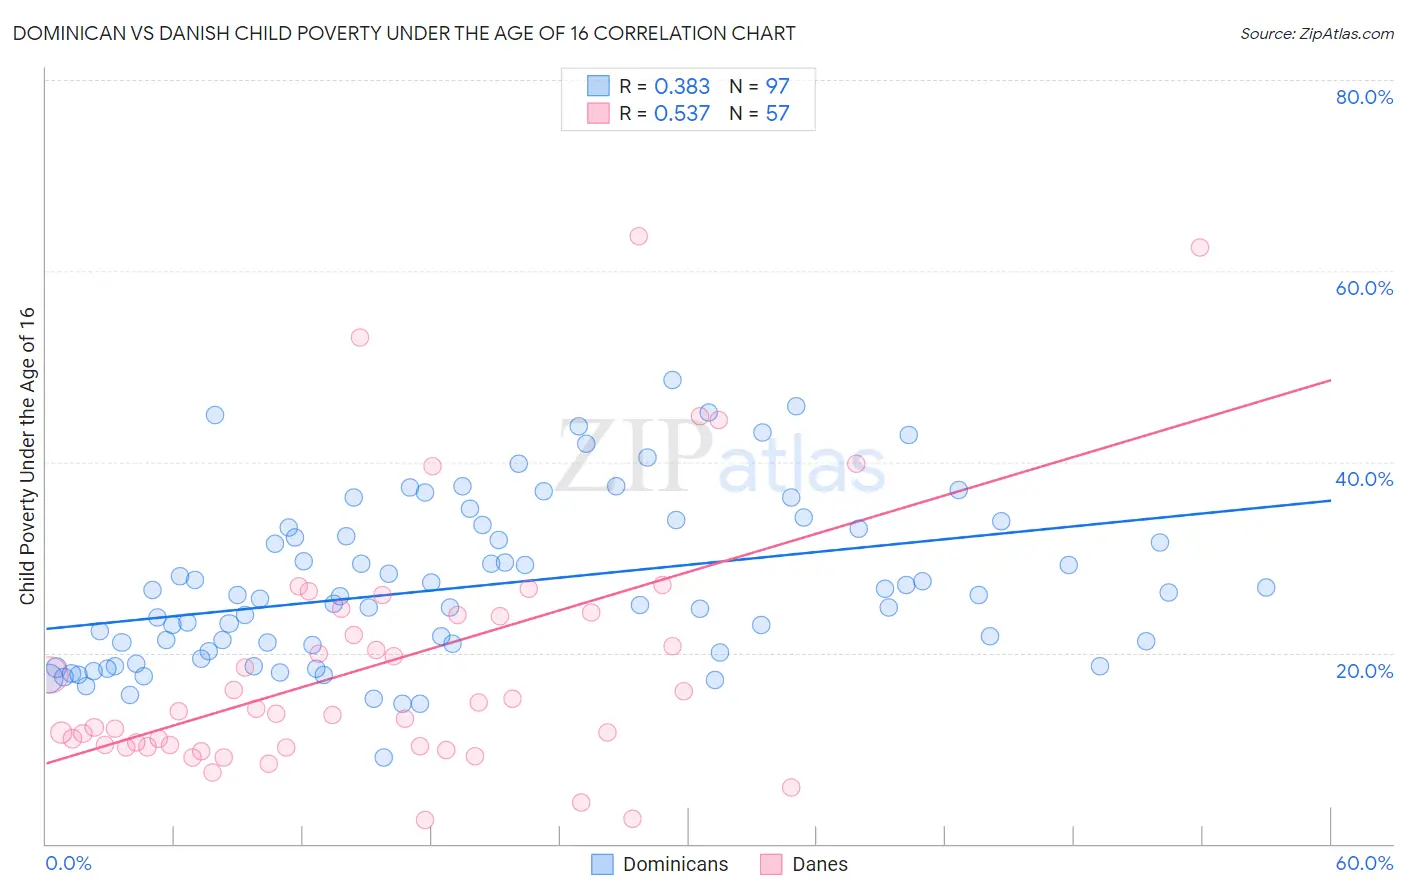 Dominican vs Danish Child Poverty Under the Age of 16